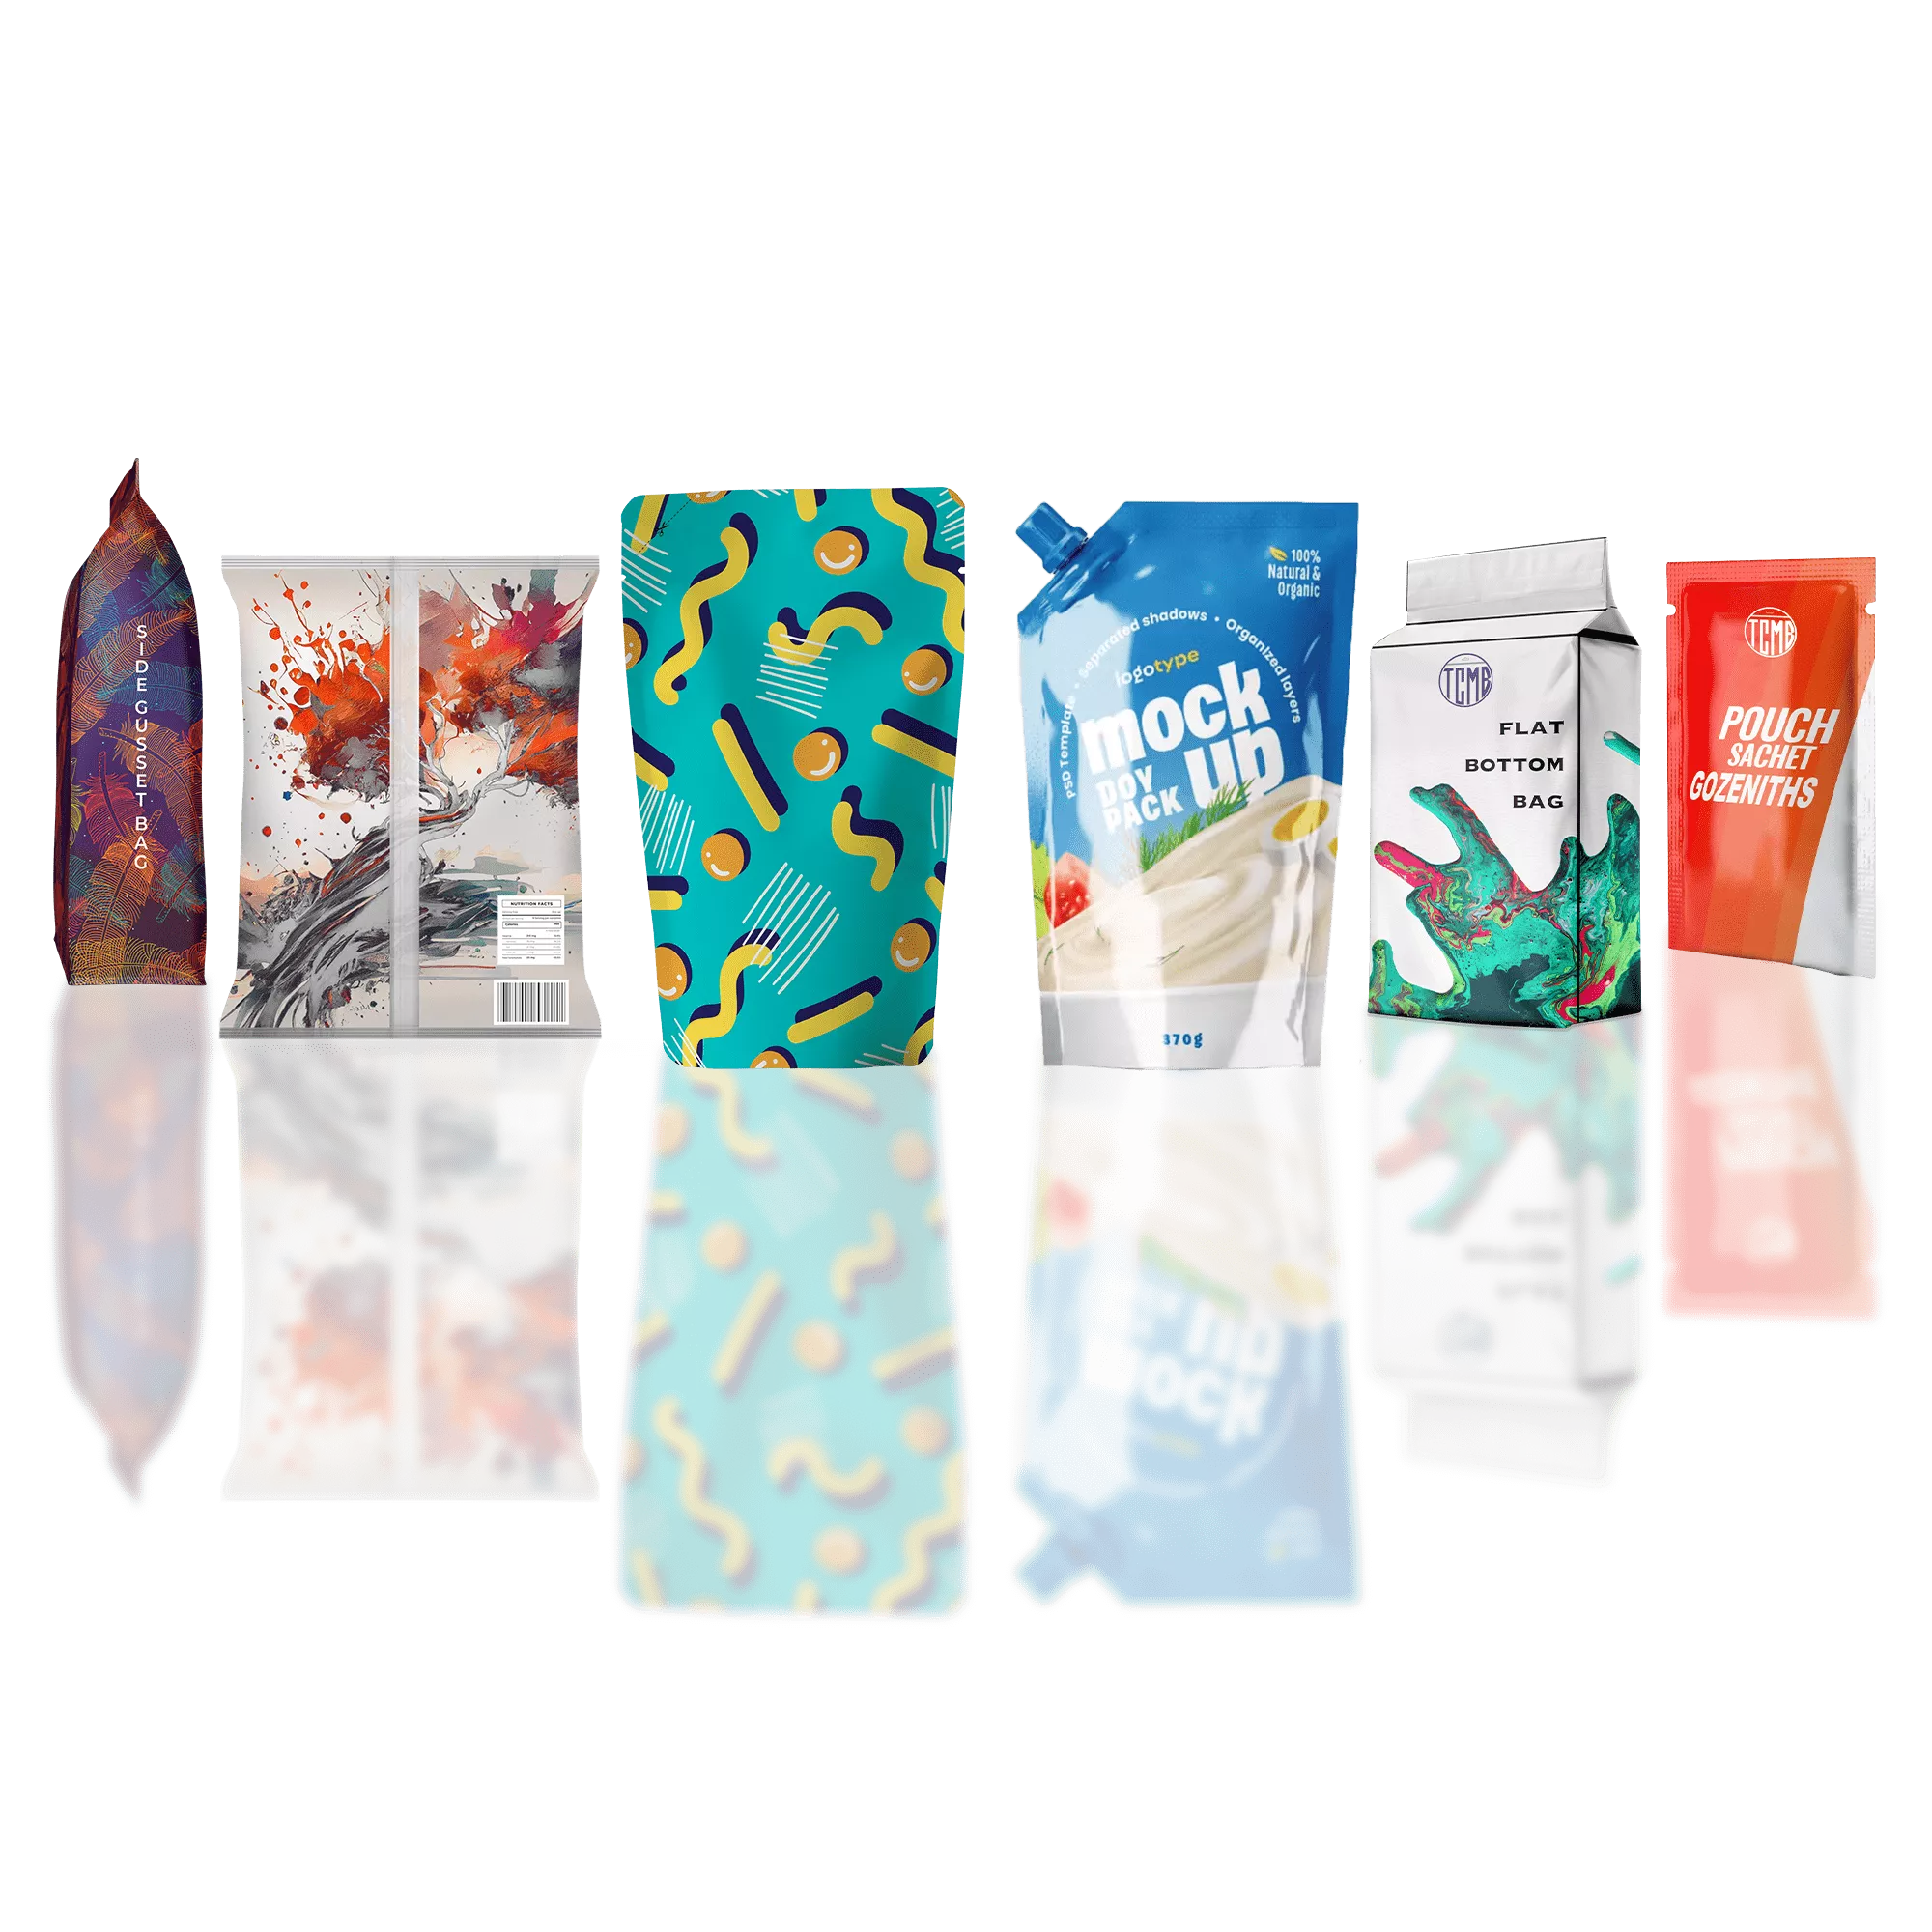 A collage showcasing various customizable, sustainable packaging options including mylar pouches, sachets, mylar bags, and gozeniths. Text overlay highlights organic and natural materials.